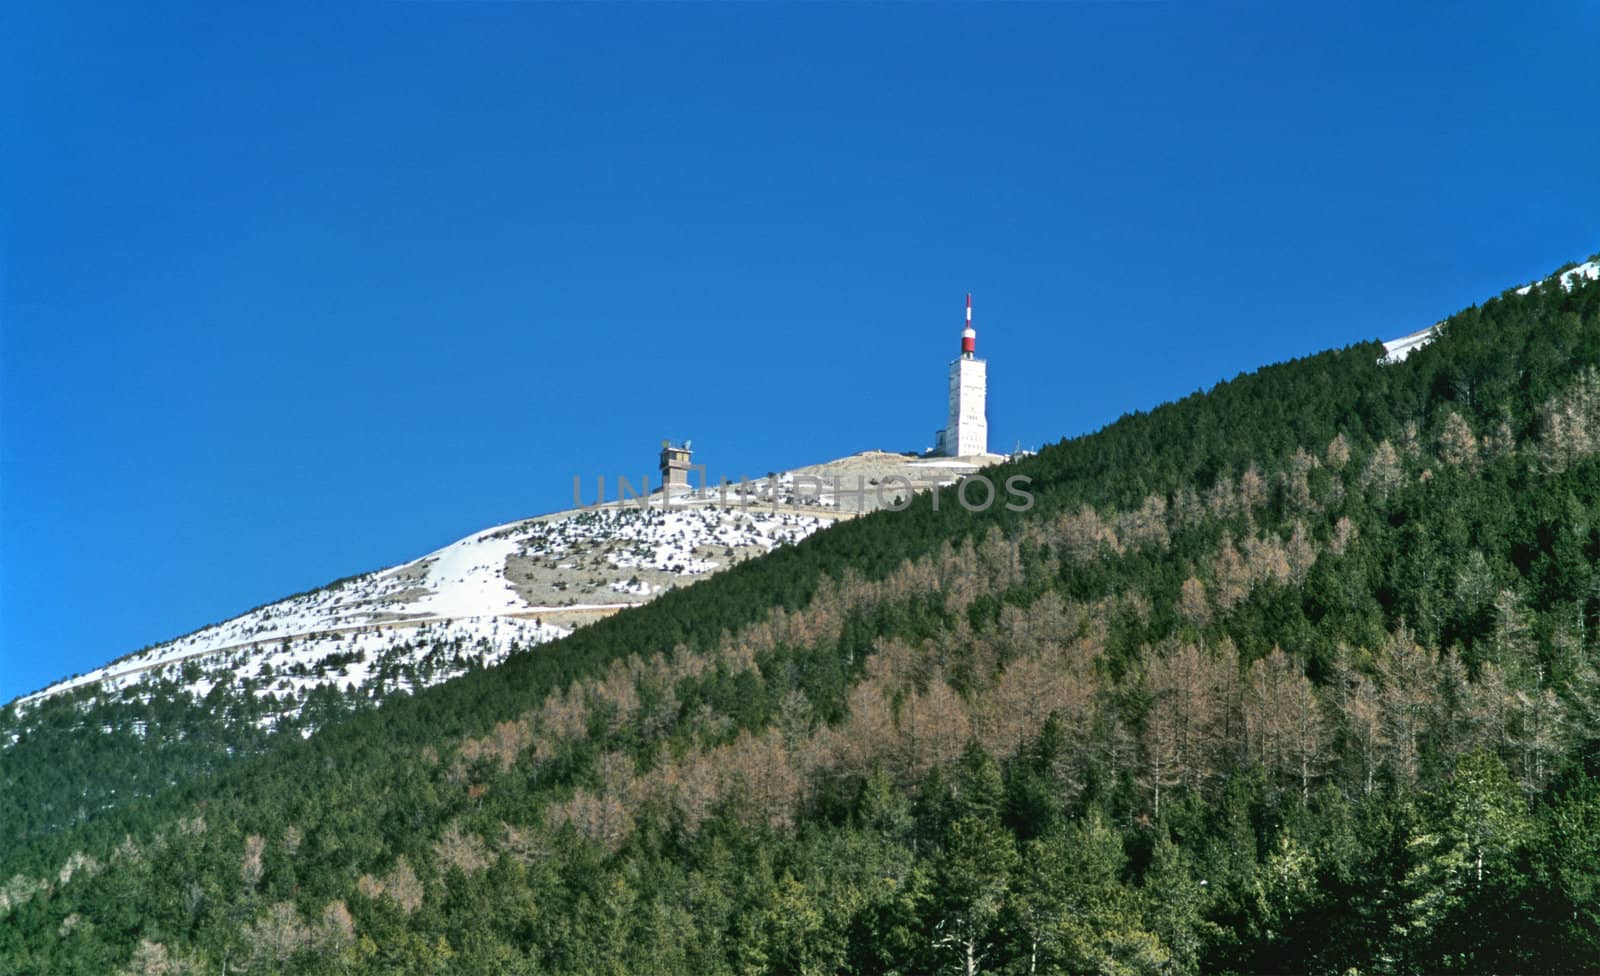 Mount Ventoux is the highest peak in Provence and is often part of the Tour de France cycle race. The telecommunications mast on it's peak can been seen around the region on clear days. 